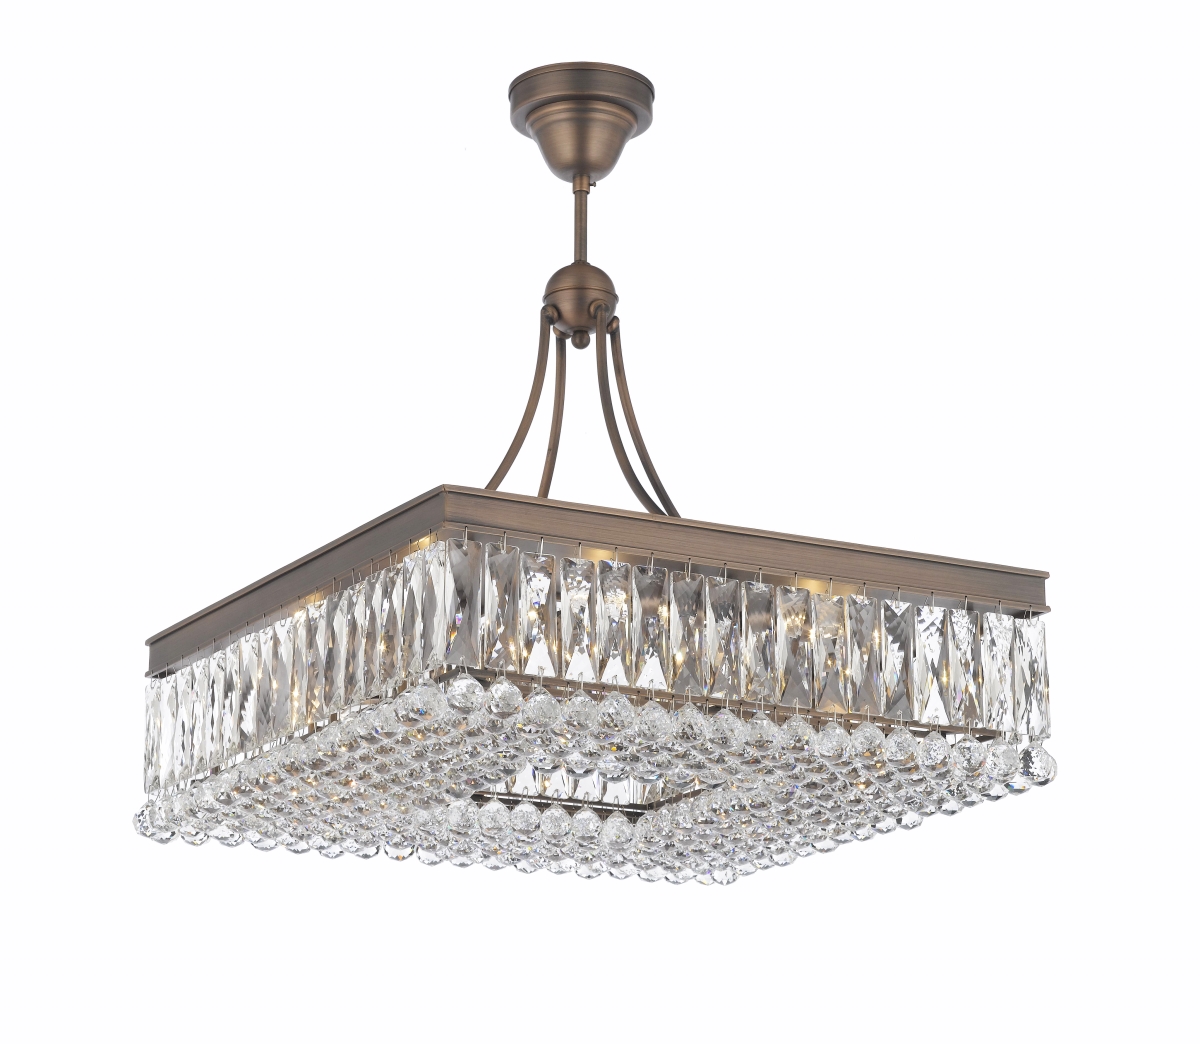 Pwg Lighting 2904-24-ac 24 In. Valencia Hanging Chandelier With Heirloom Grandcut Crystals - Antique Copper